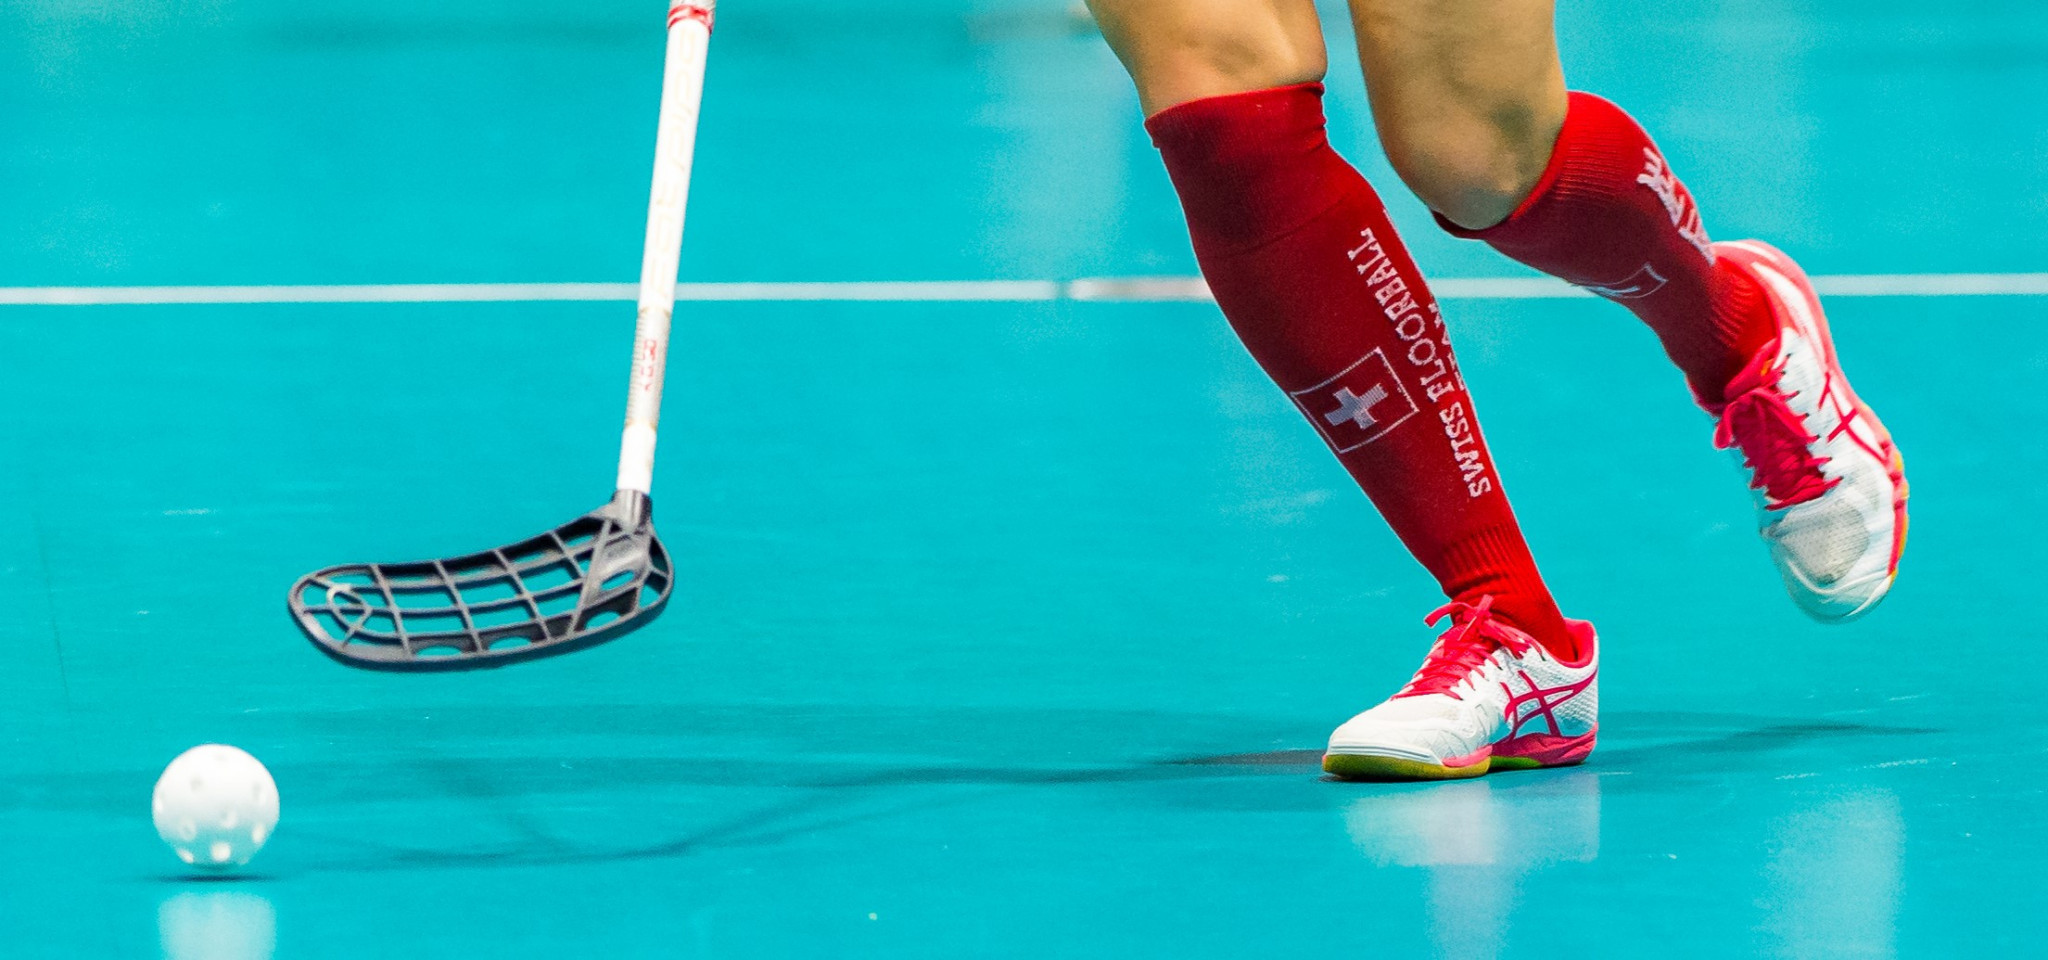 Men's World Floorball Championship qualifiers are scheduled to get underway today in Italy ©Getty Images